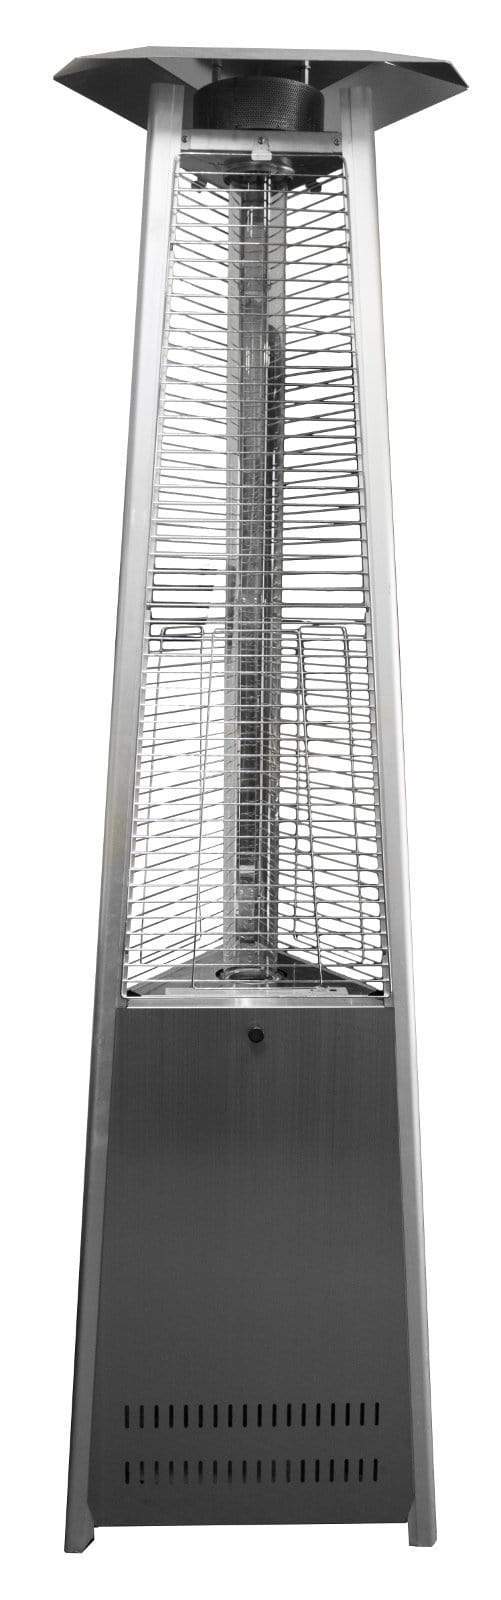 Hiland Tower Patio Heater Patio Heater Hiland Patio Heaters Commercial Glass Tube Patio Heater in Stainless Steel